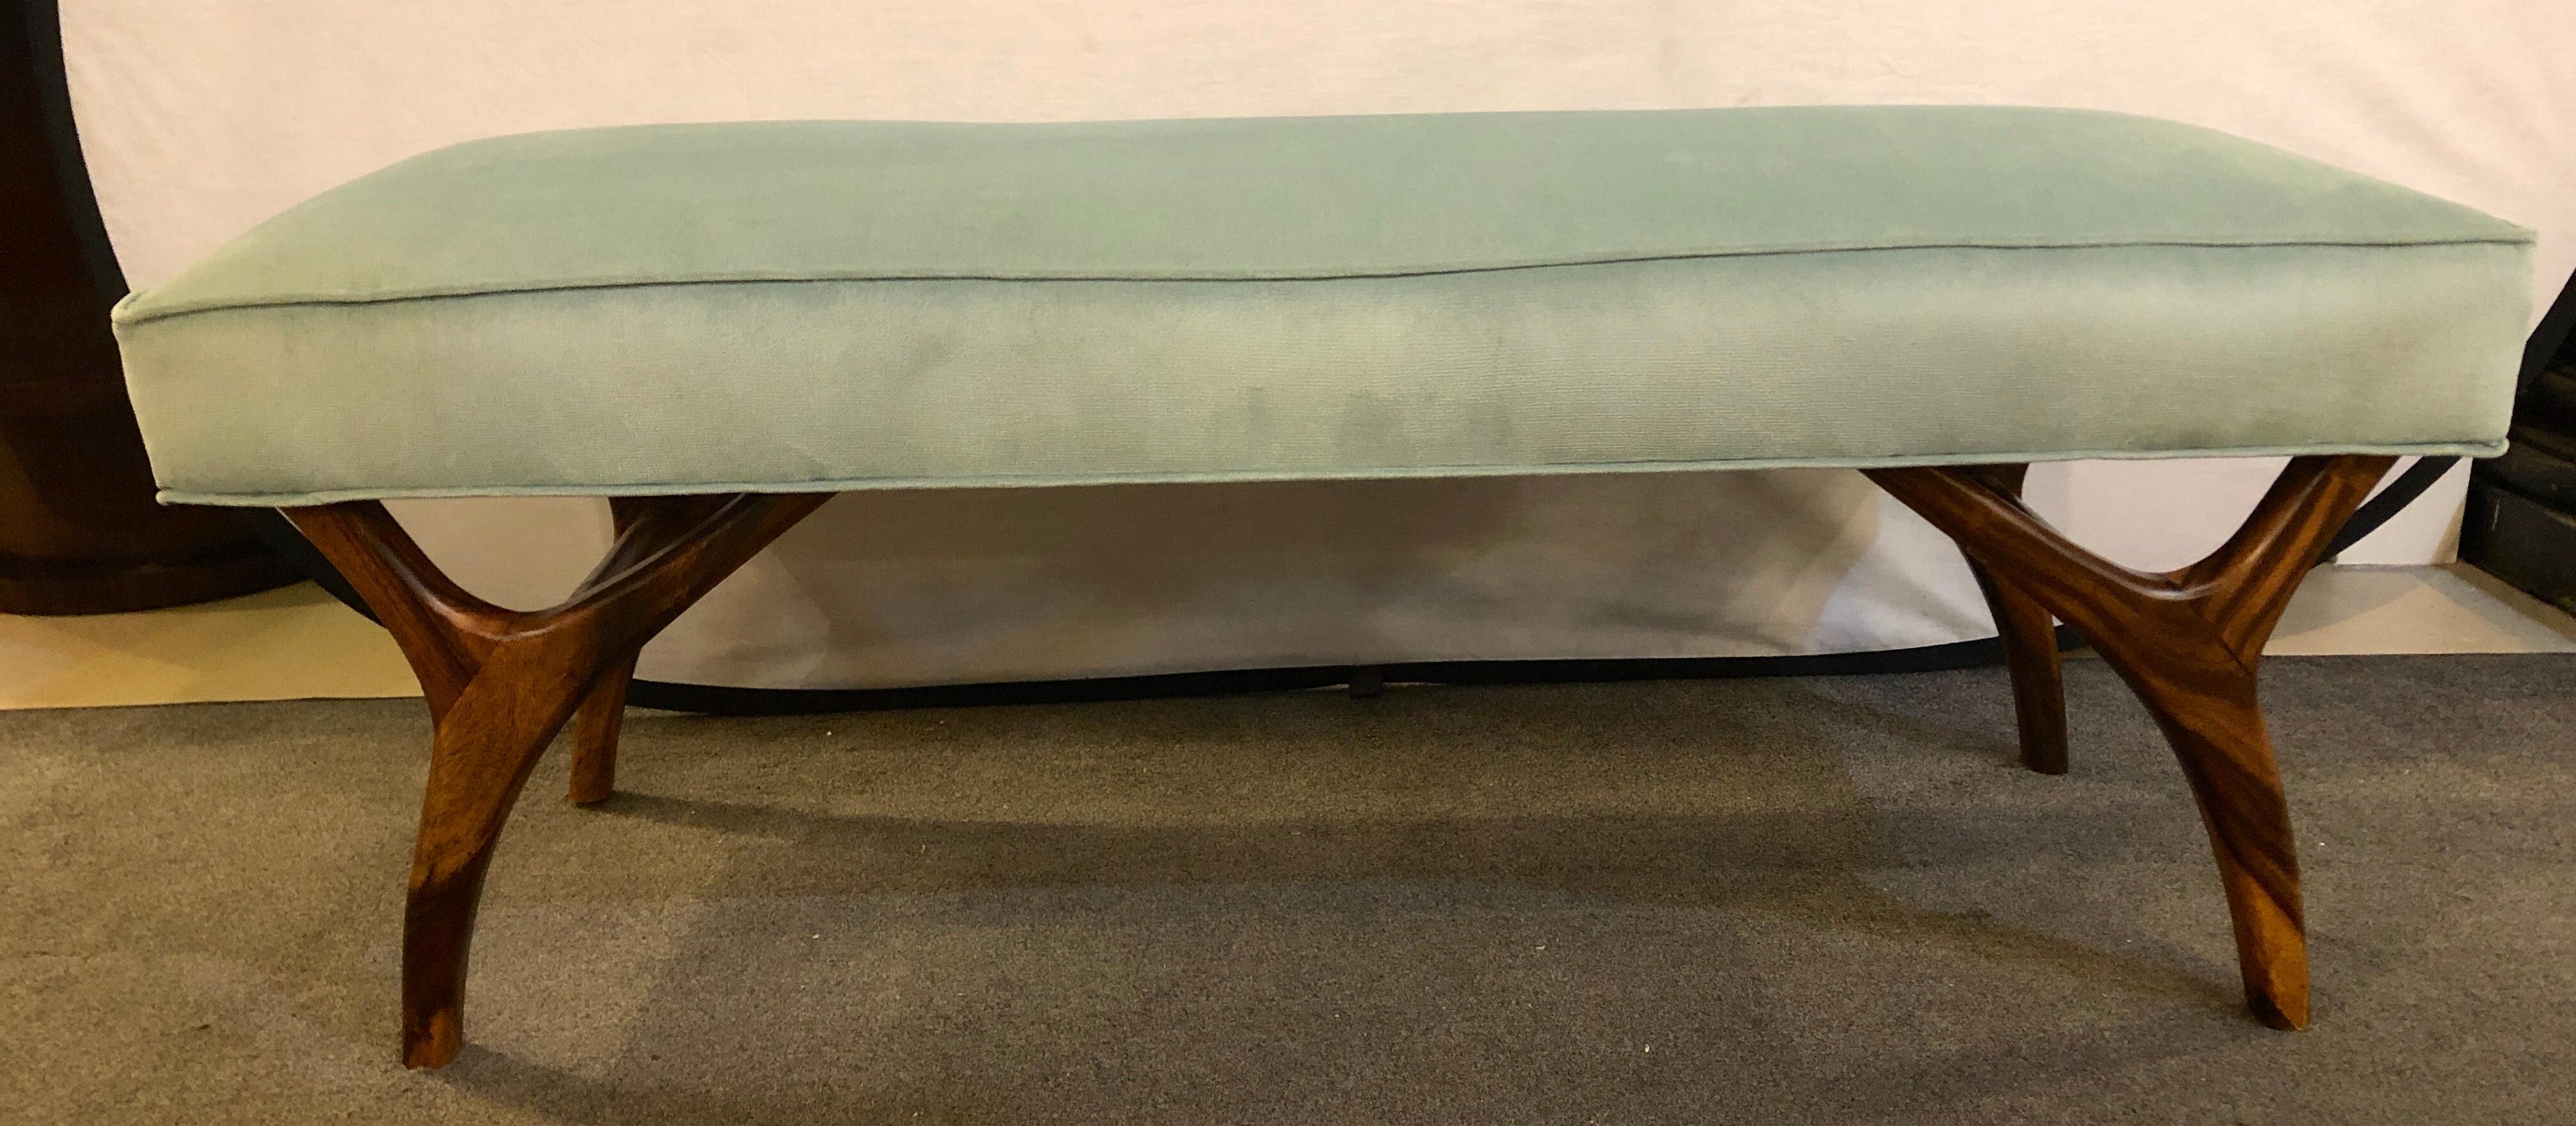 A Mid-Century Modern window bench or footstool in new upholstered on sprayed legs.